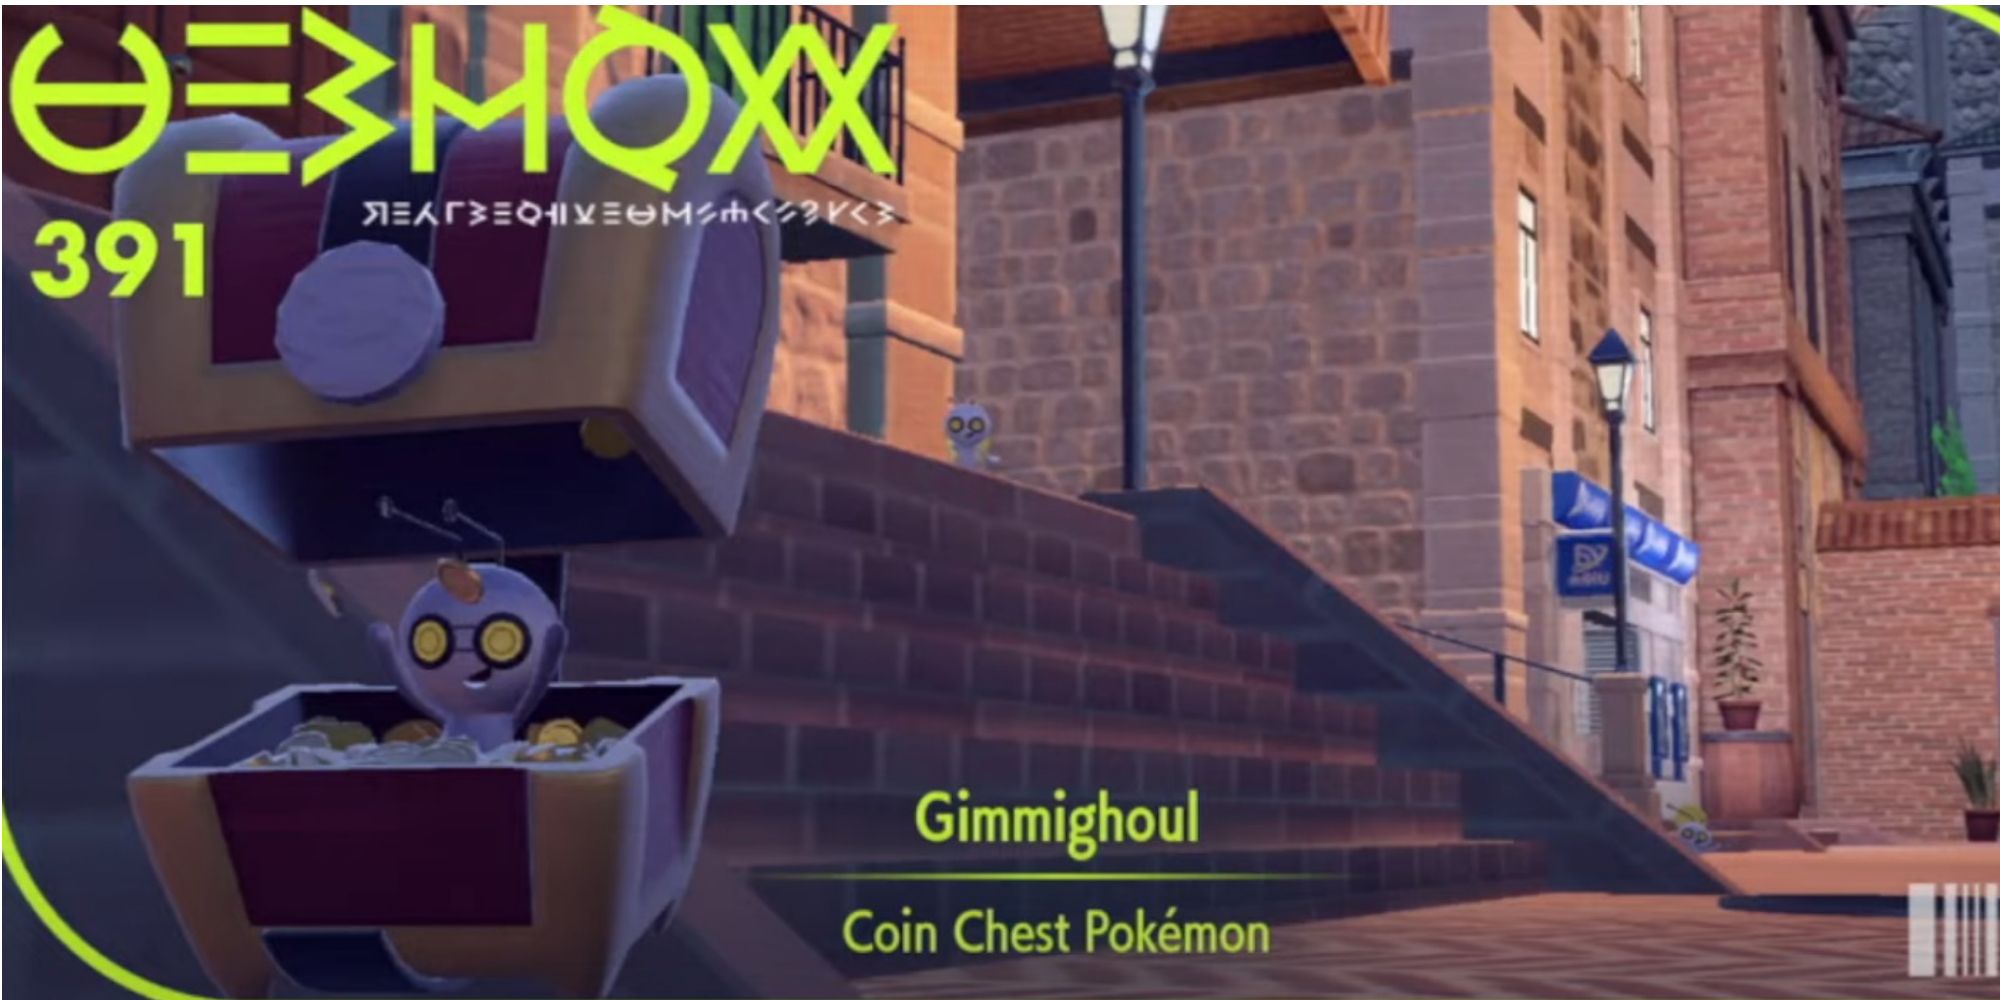 gimmighoul pokedex entry